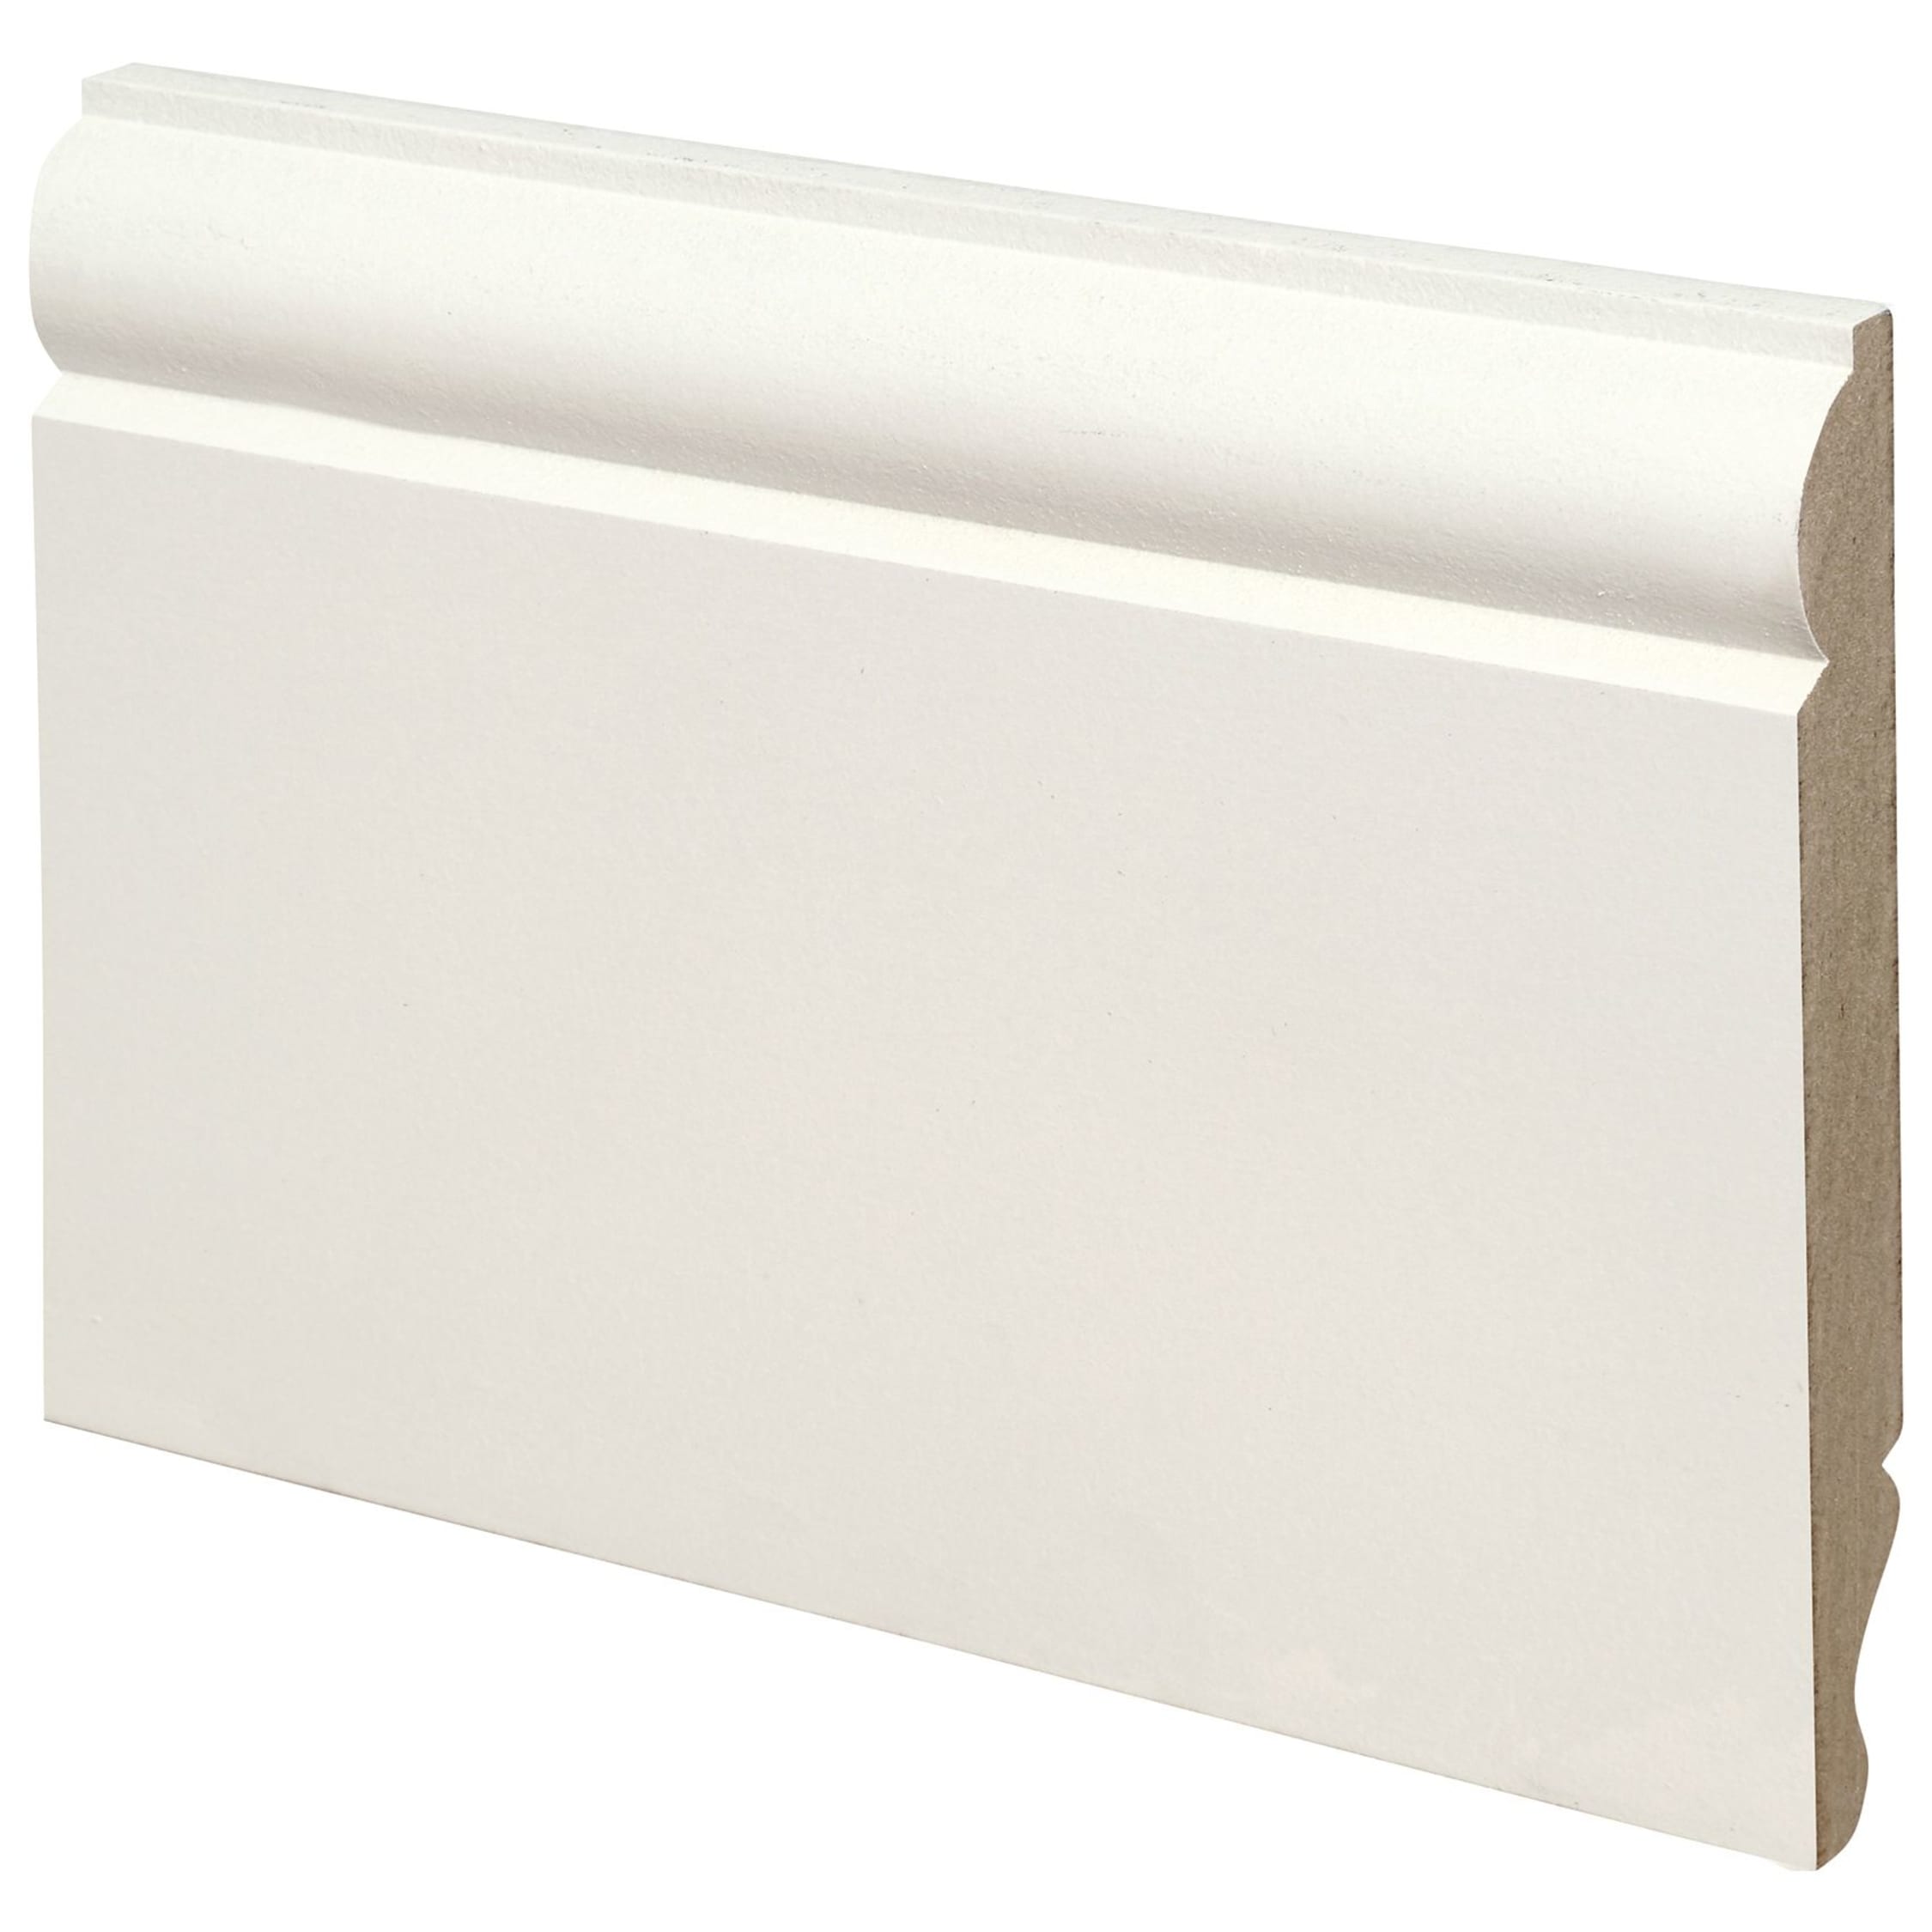 Pre-Primed MDF Skirting Board Bullnose 144 x 18mm  Free P&P pack sizes 